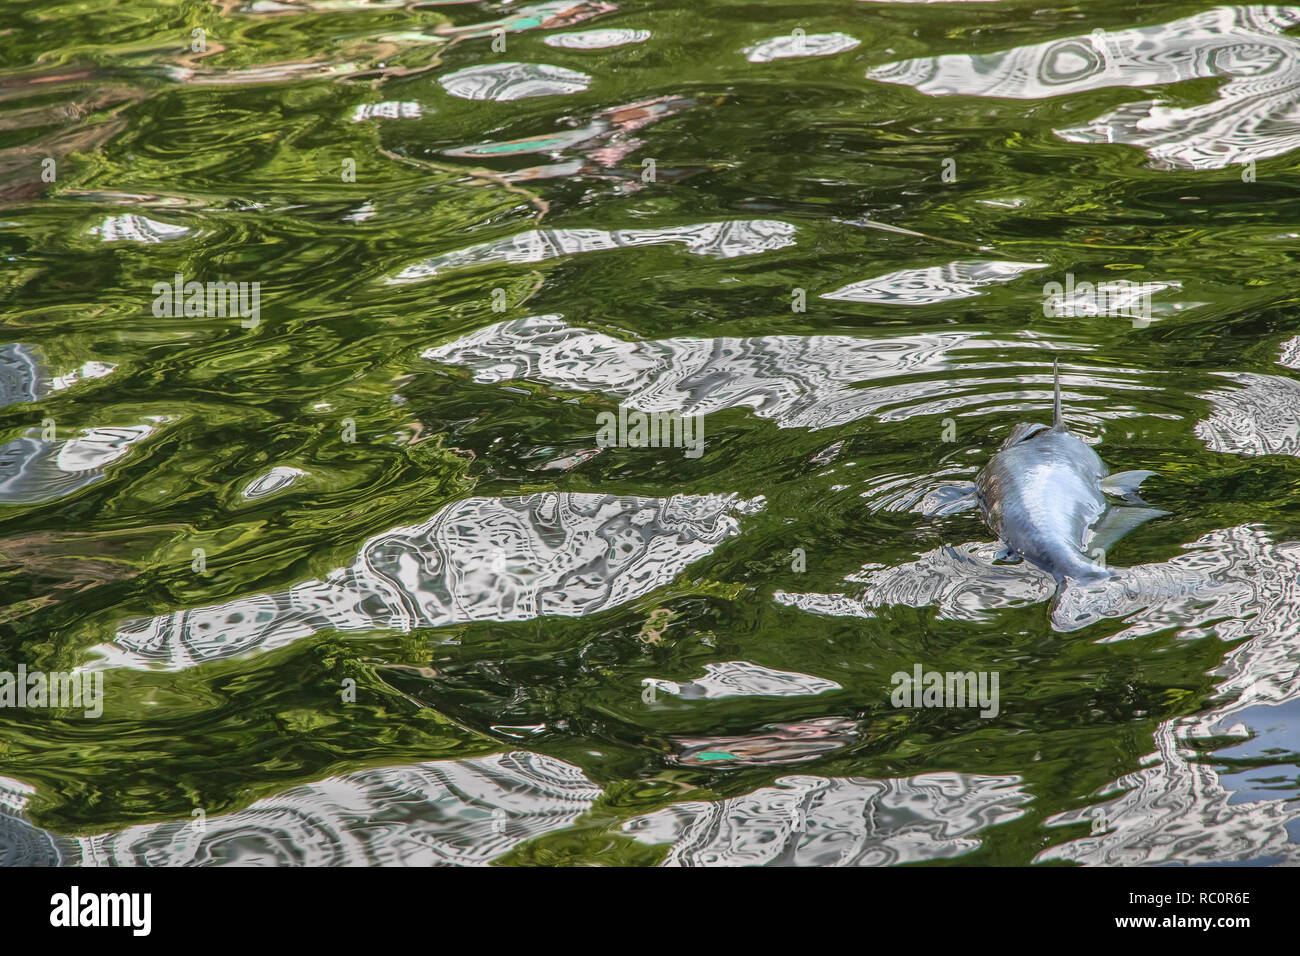 Dead fish floating in the waste water background. Stock Photo